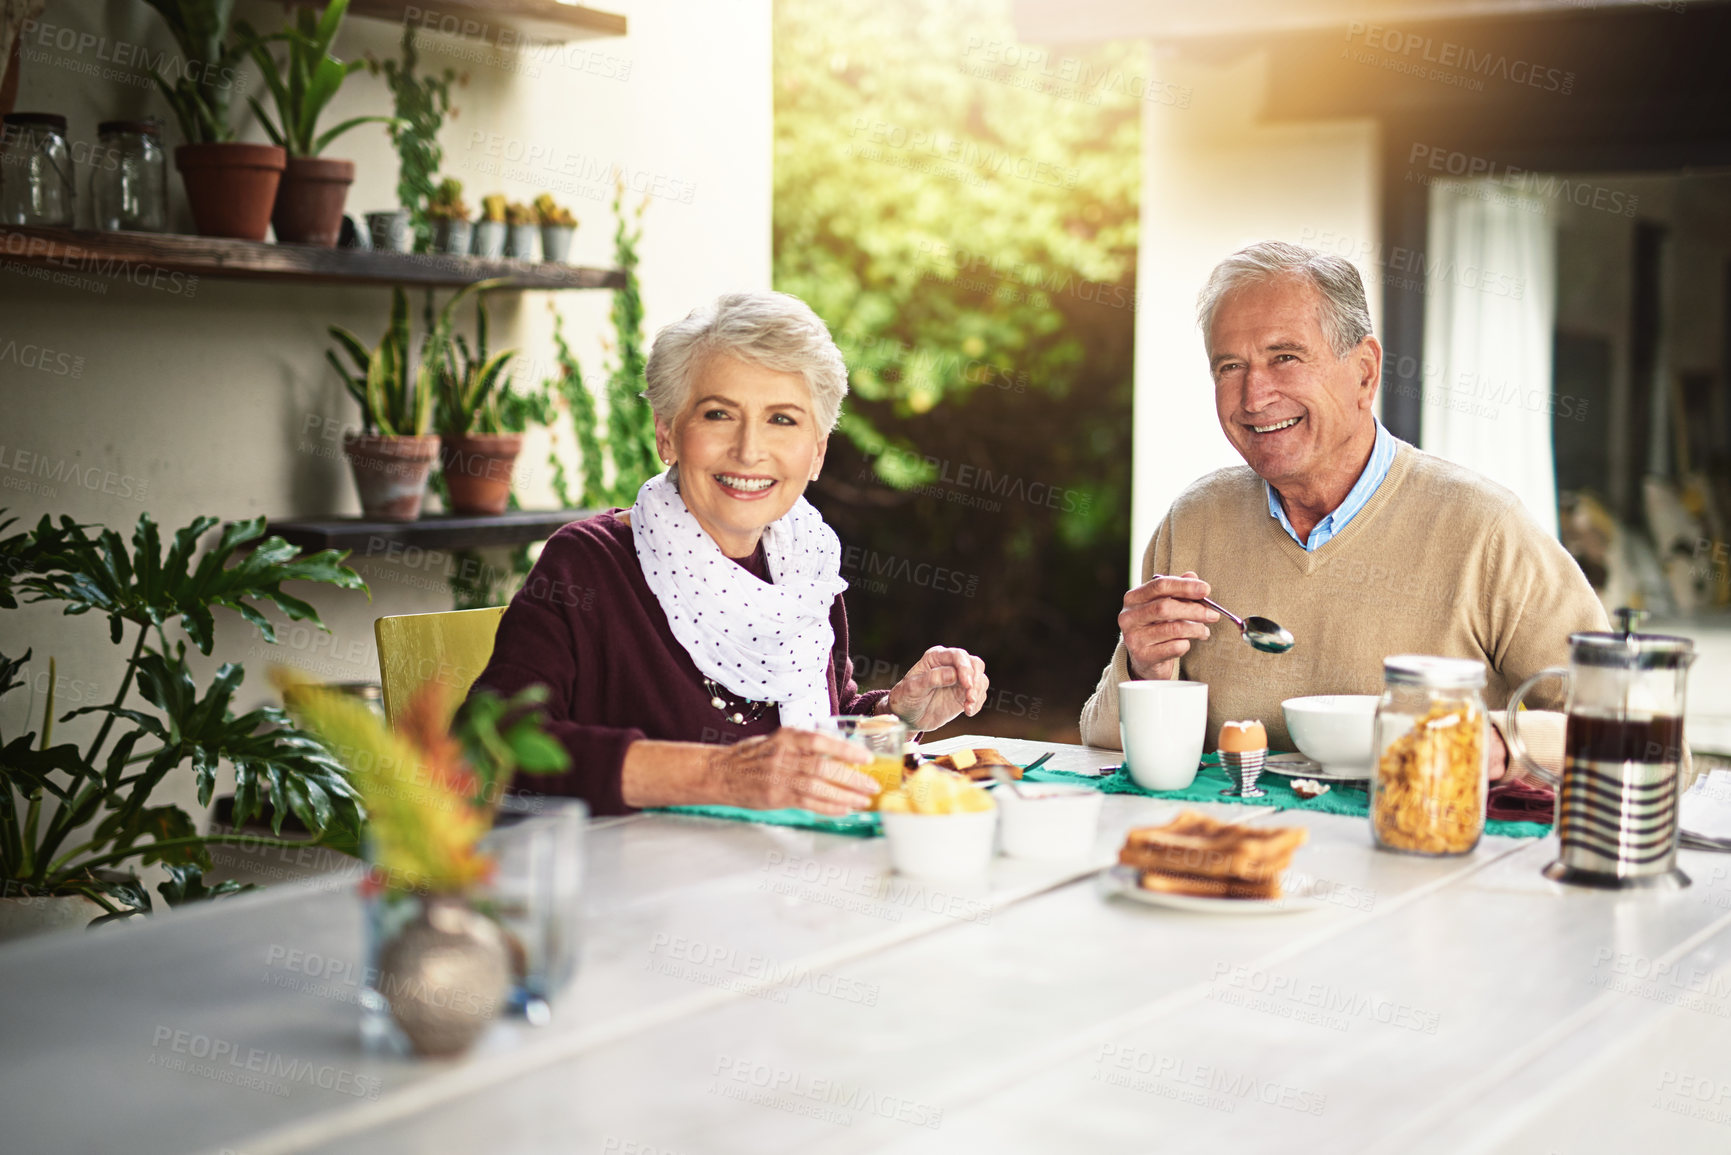 Buy stock photo Portrait of a happy senior couple enjoying breakfast together at home